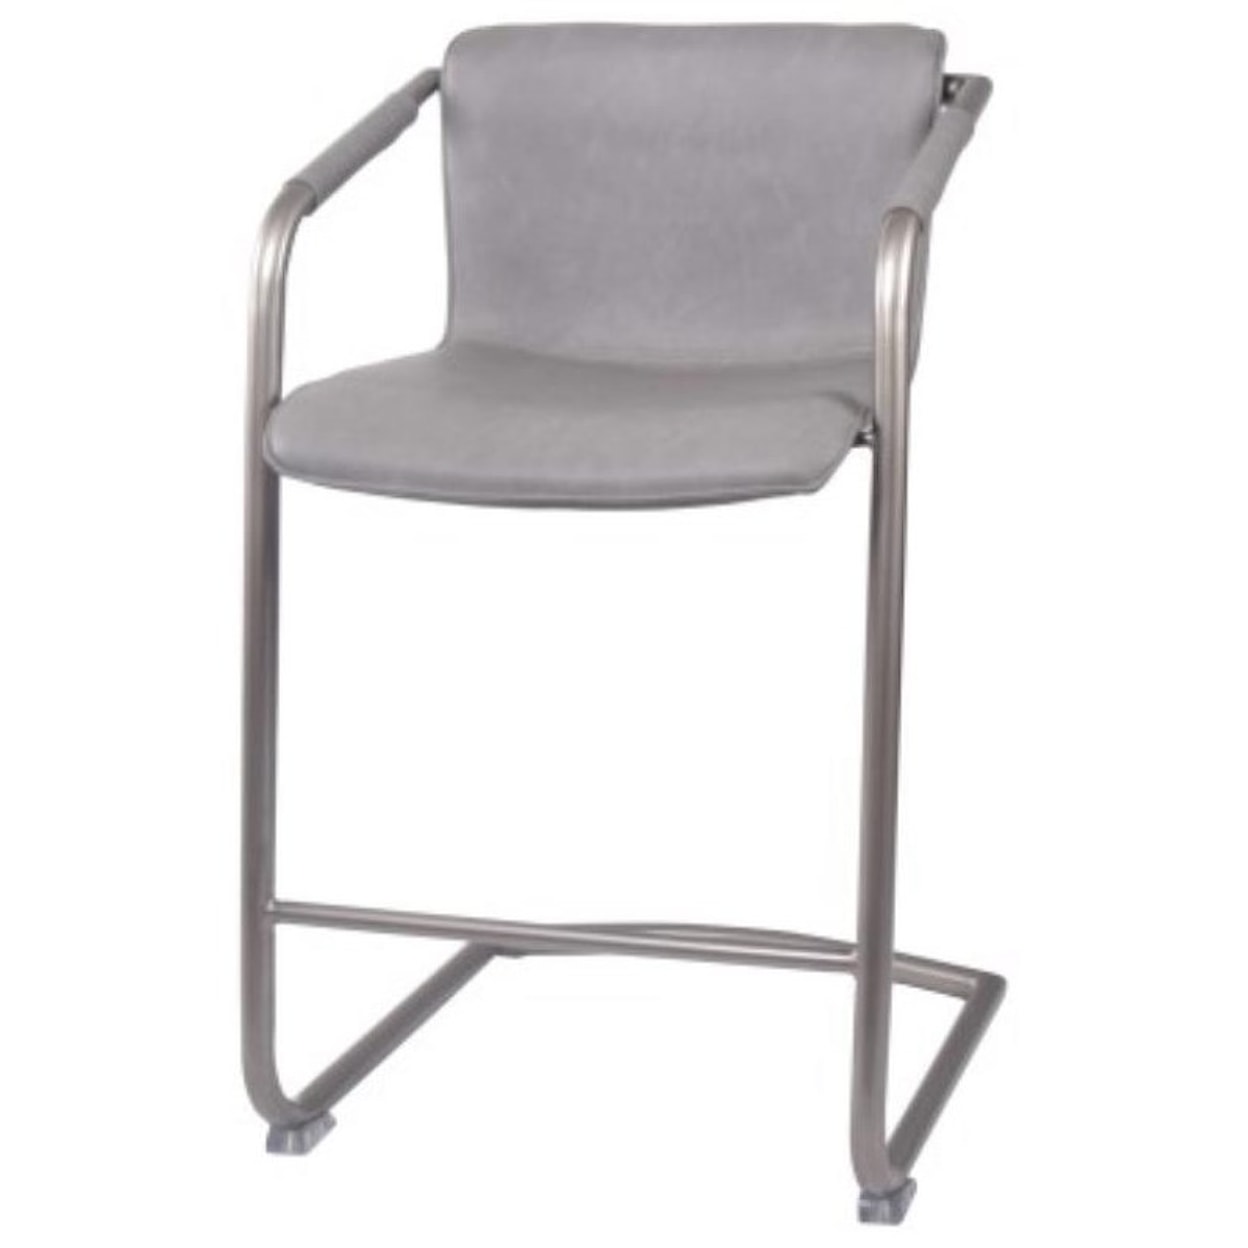 Happy Chair Indy Indy Counter Stool, Antique Graphite Gray